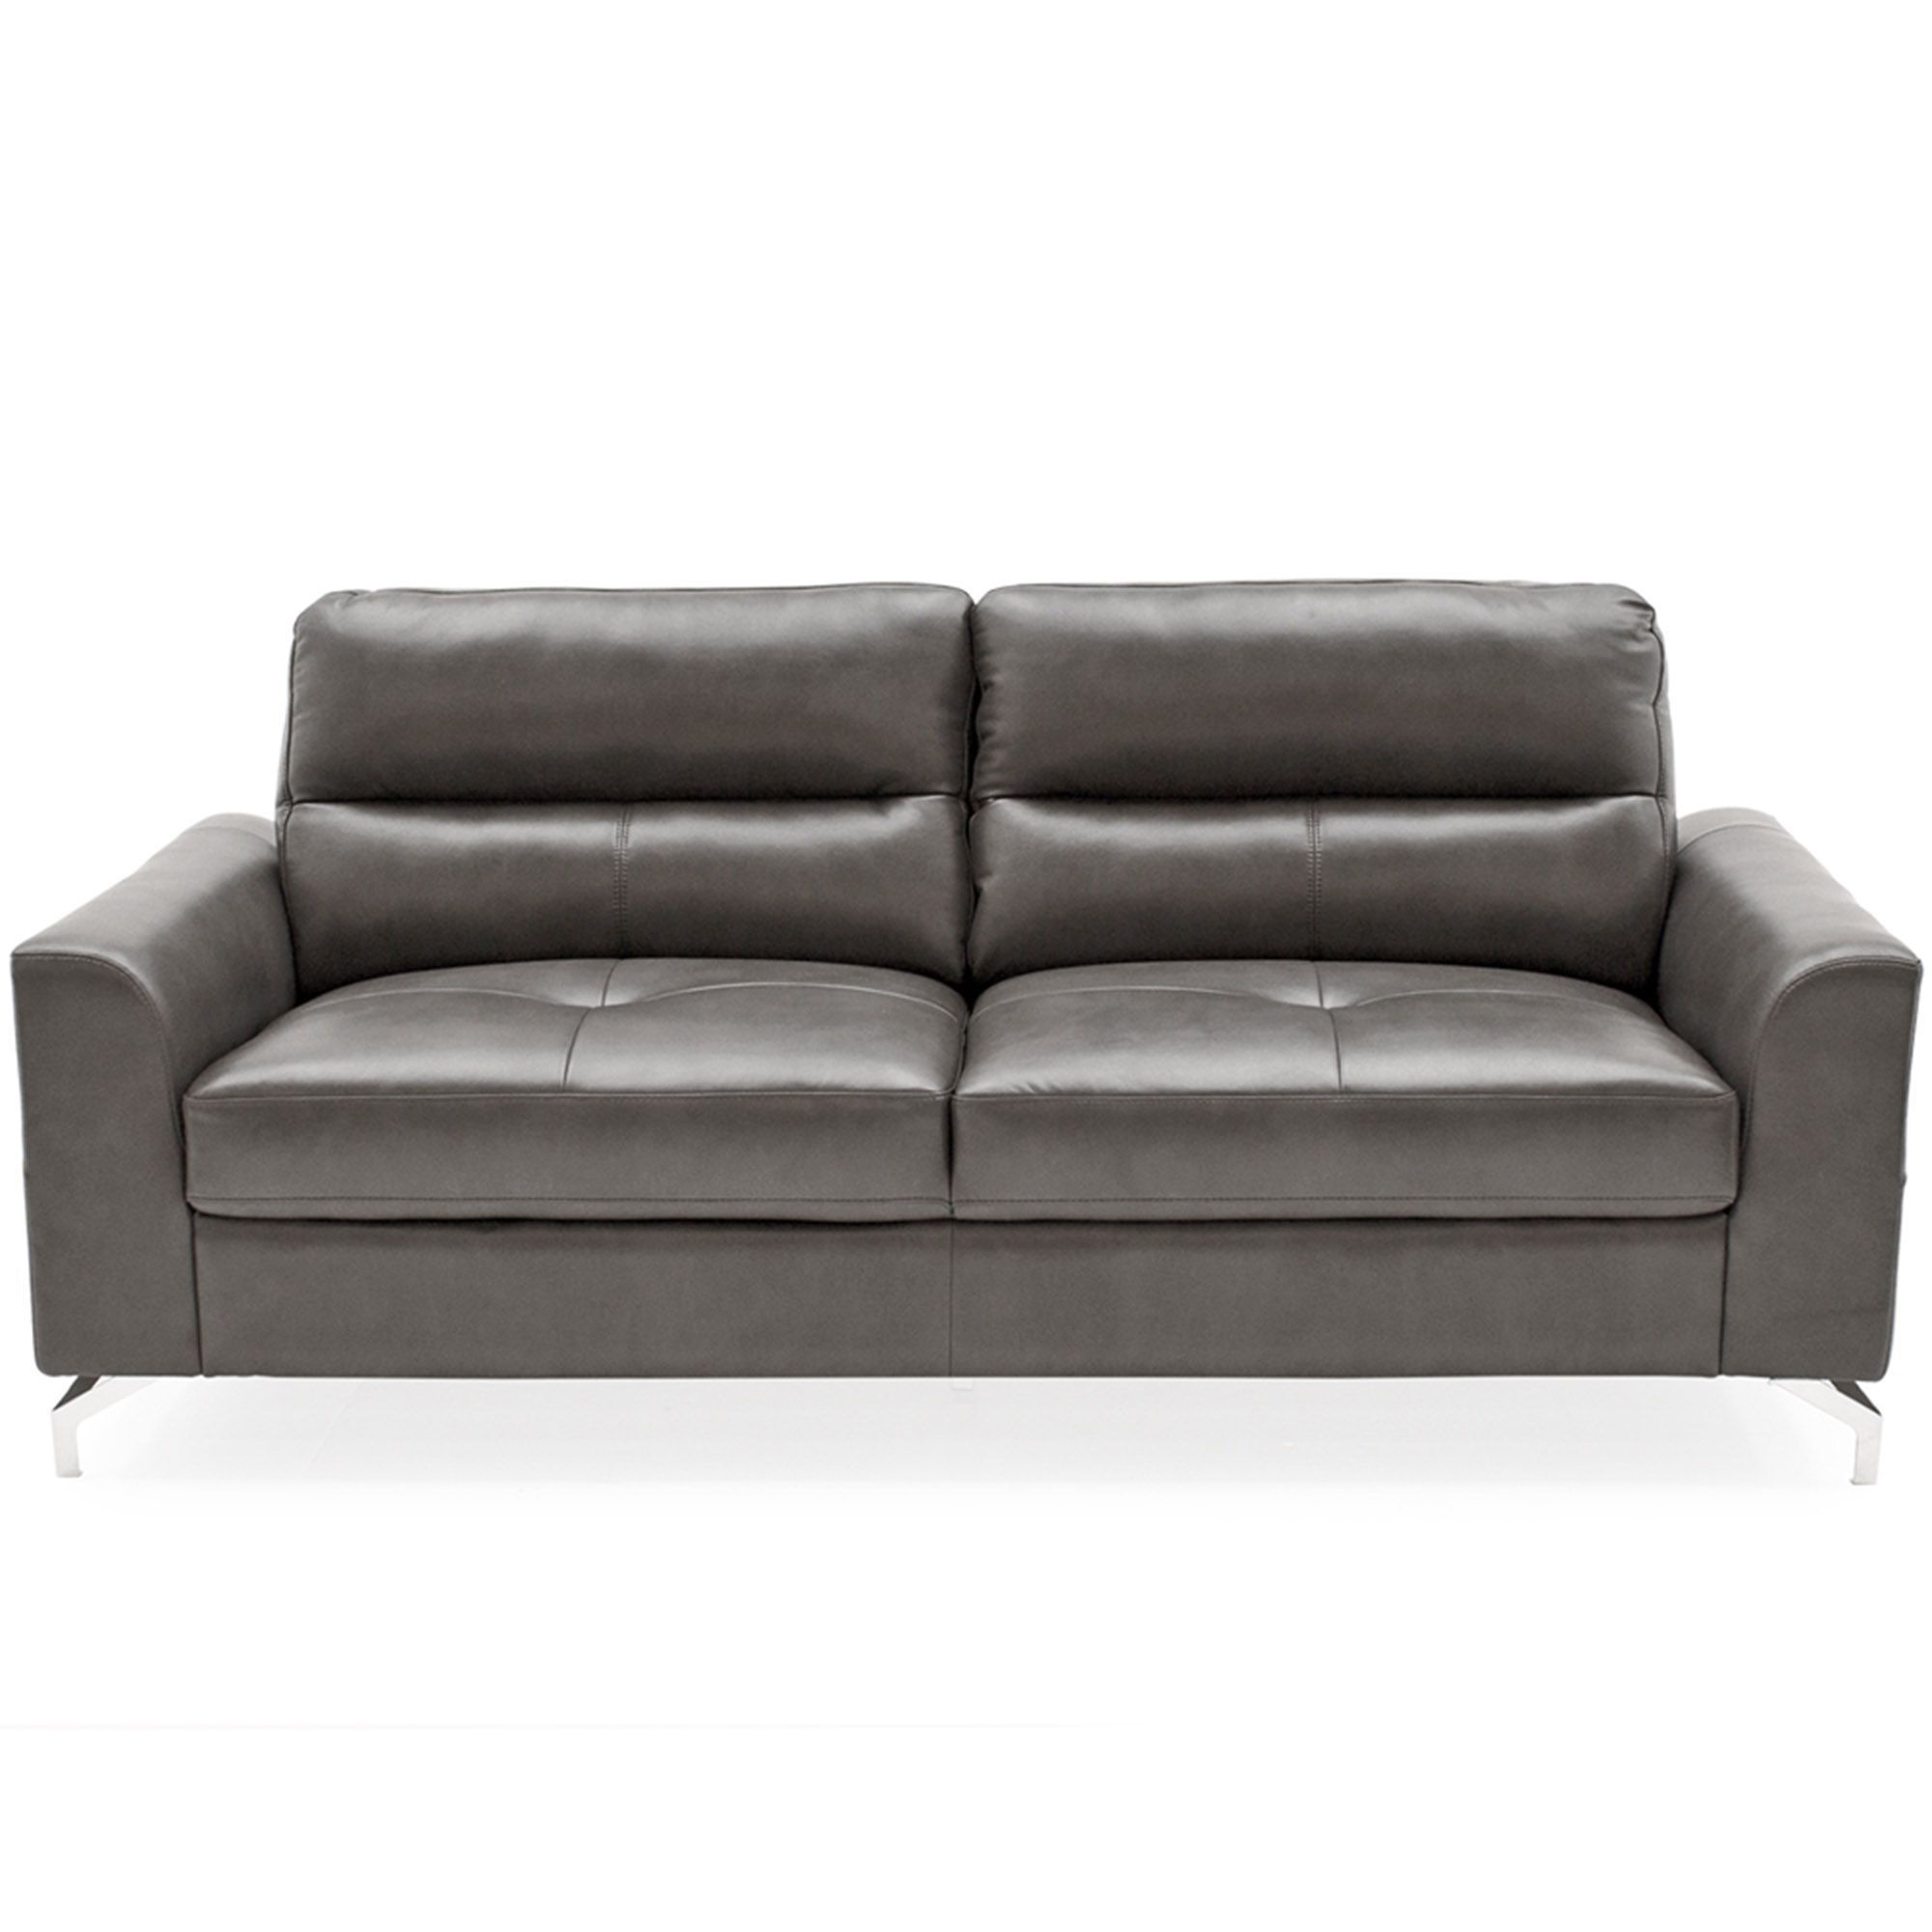 Lambro 3 Seater Sofa Grey Faux Leather – All Sofa Collections – Meubles Intended For Traditional 3 Seater Faux Leather Sofas (Gallery 16 of 20)